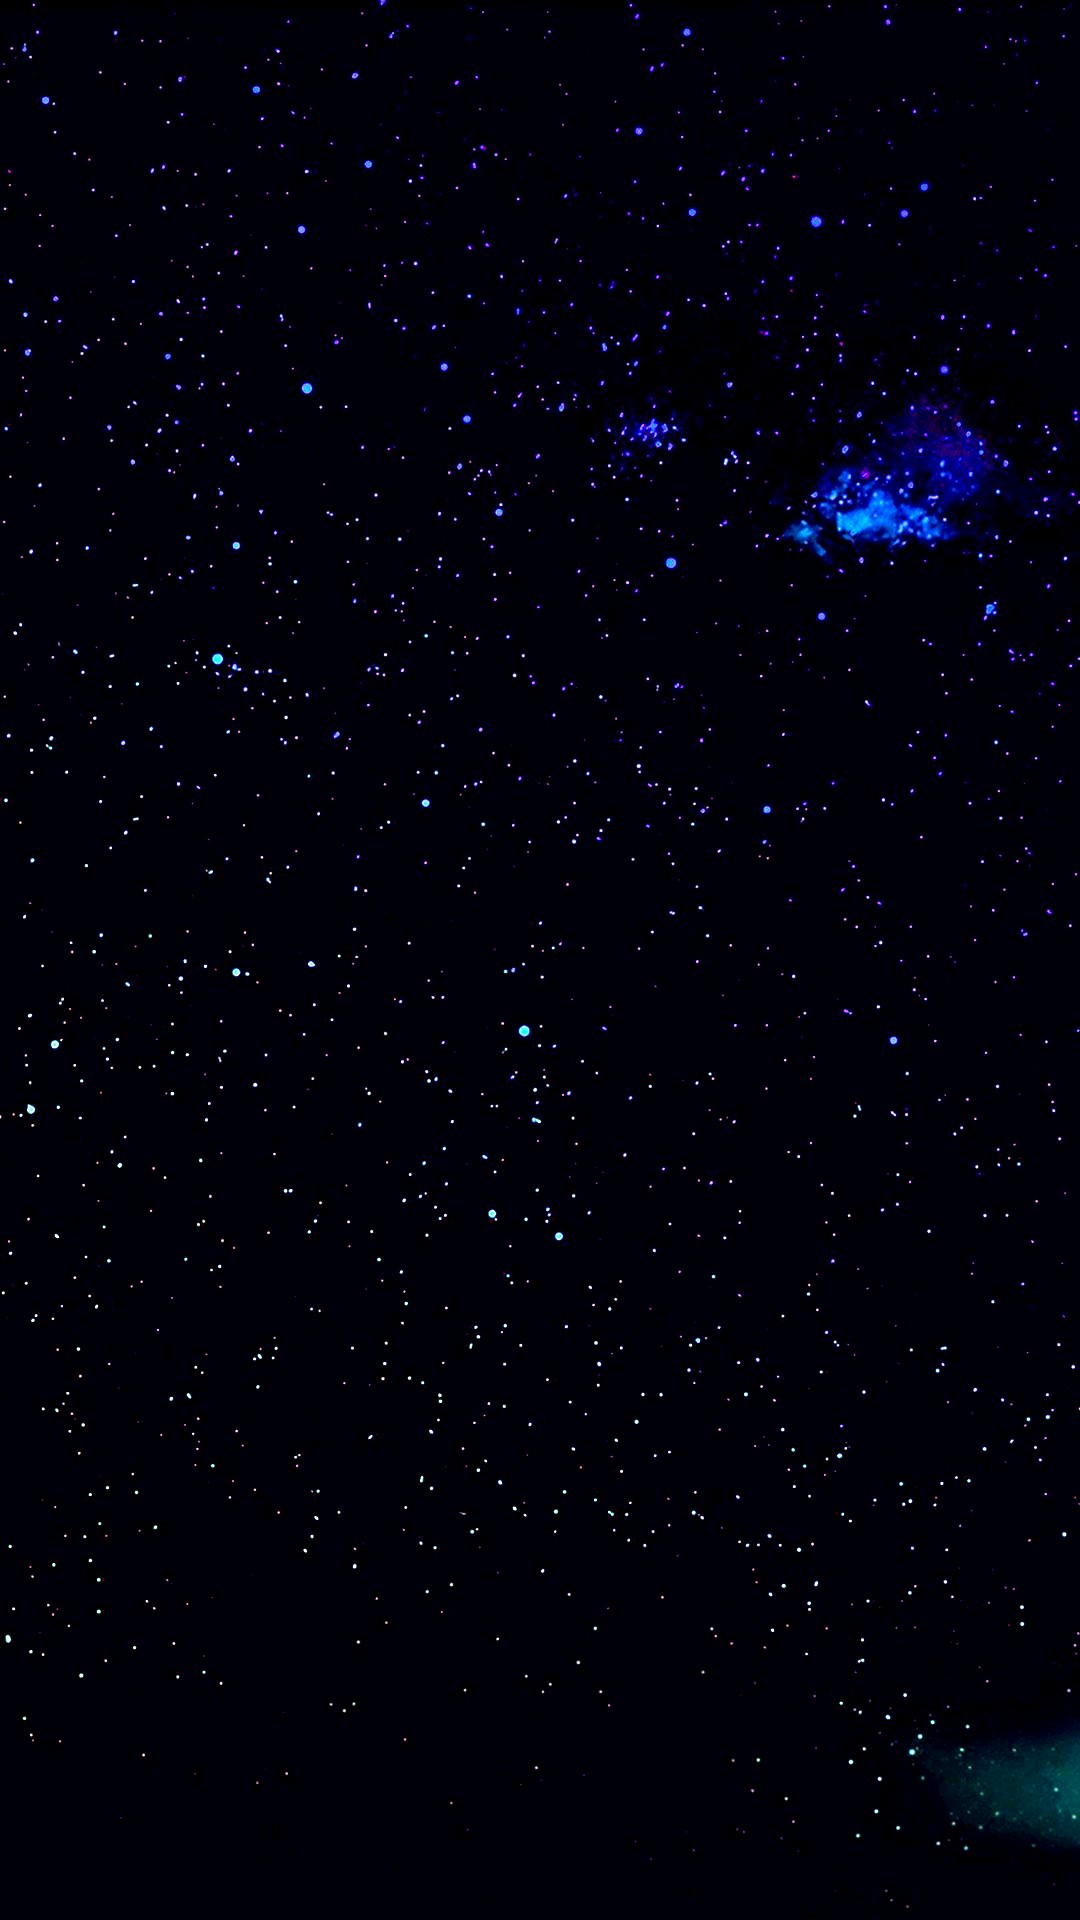 Stars Aesthetic iPhone 6 Wallpaper With high-resolution 1080X1920 pixel. You can use this wallpaper for your iPhone 5, 6, 7, 8, X, XS, XR backgrounds, Mobile Screensaver, or iPad Lock Screen